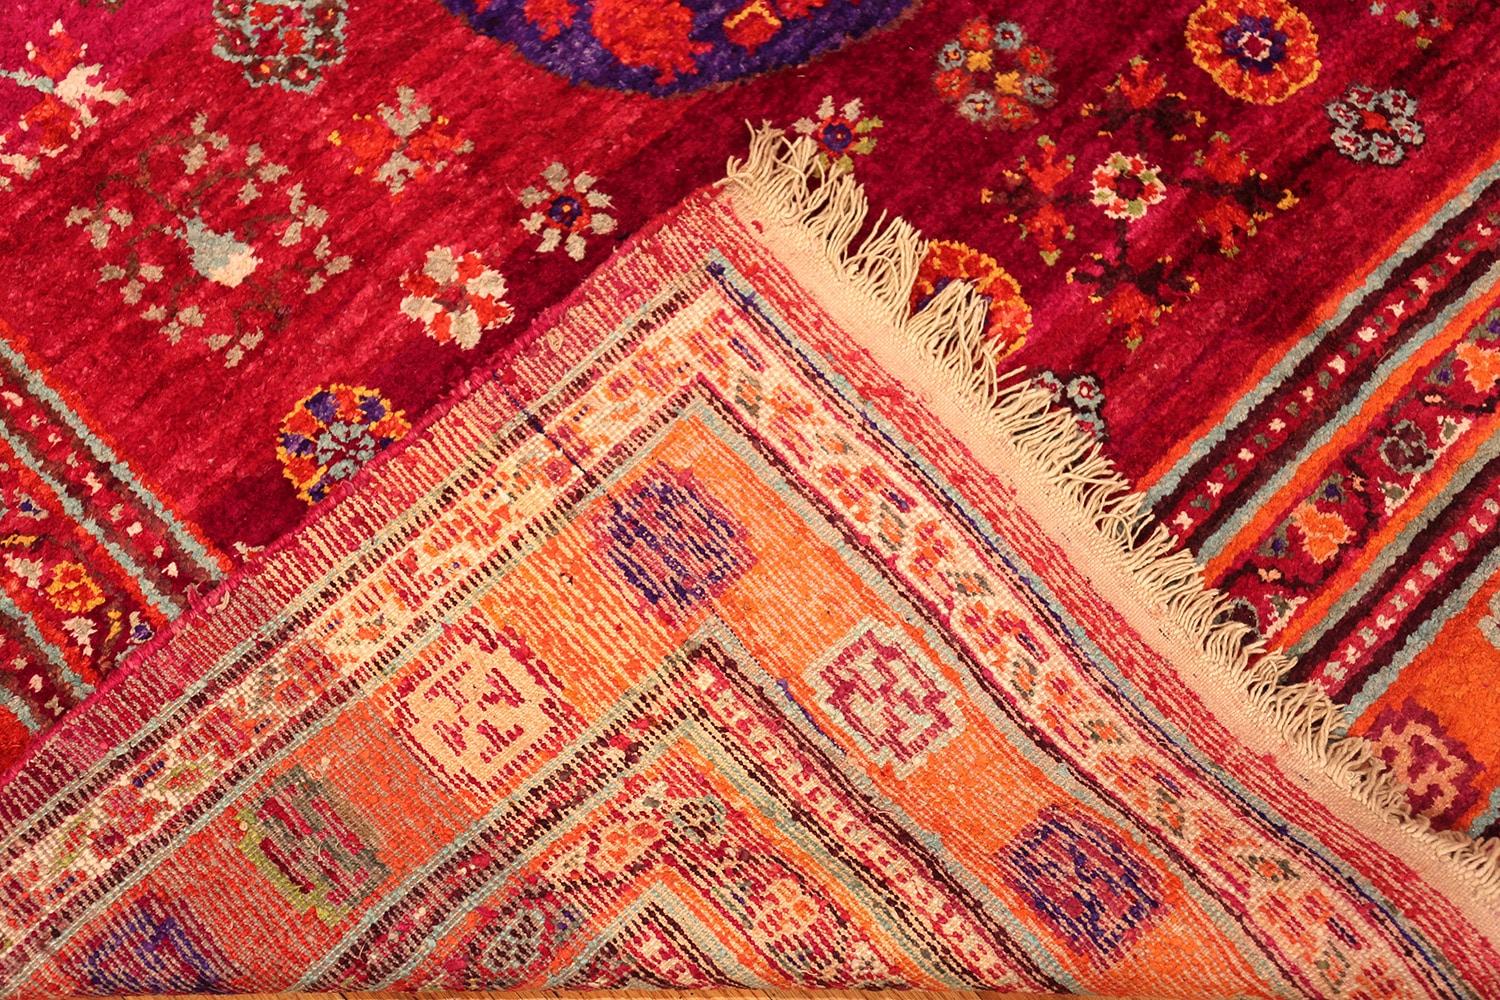 An Exciting Artistic and Funky Vintage Purple Pomegranate Design Silk Khotan Rug, Country of Origin / Rug Type: East Turkestan Rugs, Circa Date: Vintage / Mid 20th Century. Size: 5 ft 10 in x 11 ft 4 in (1.78 m x 3.45 m)

